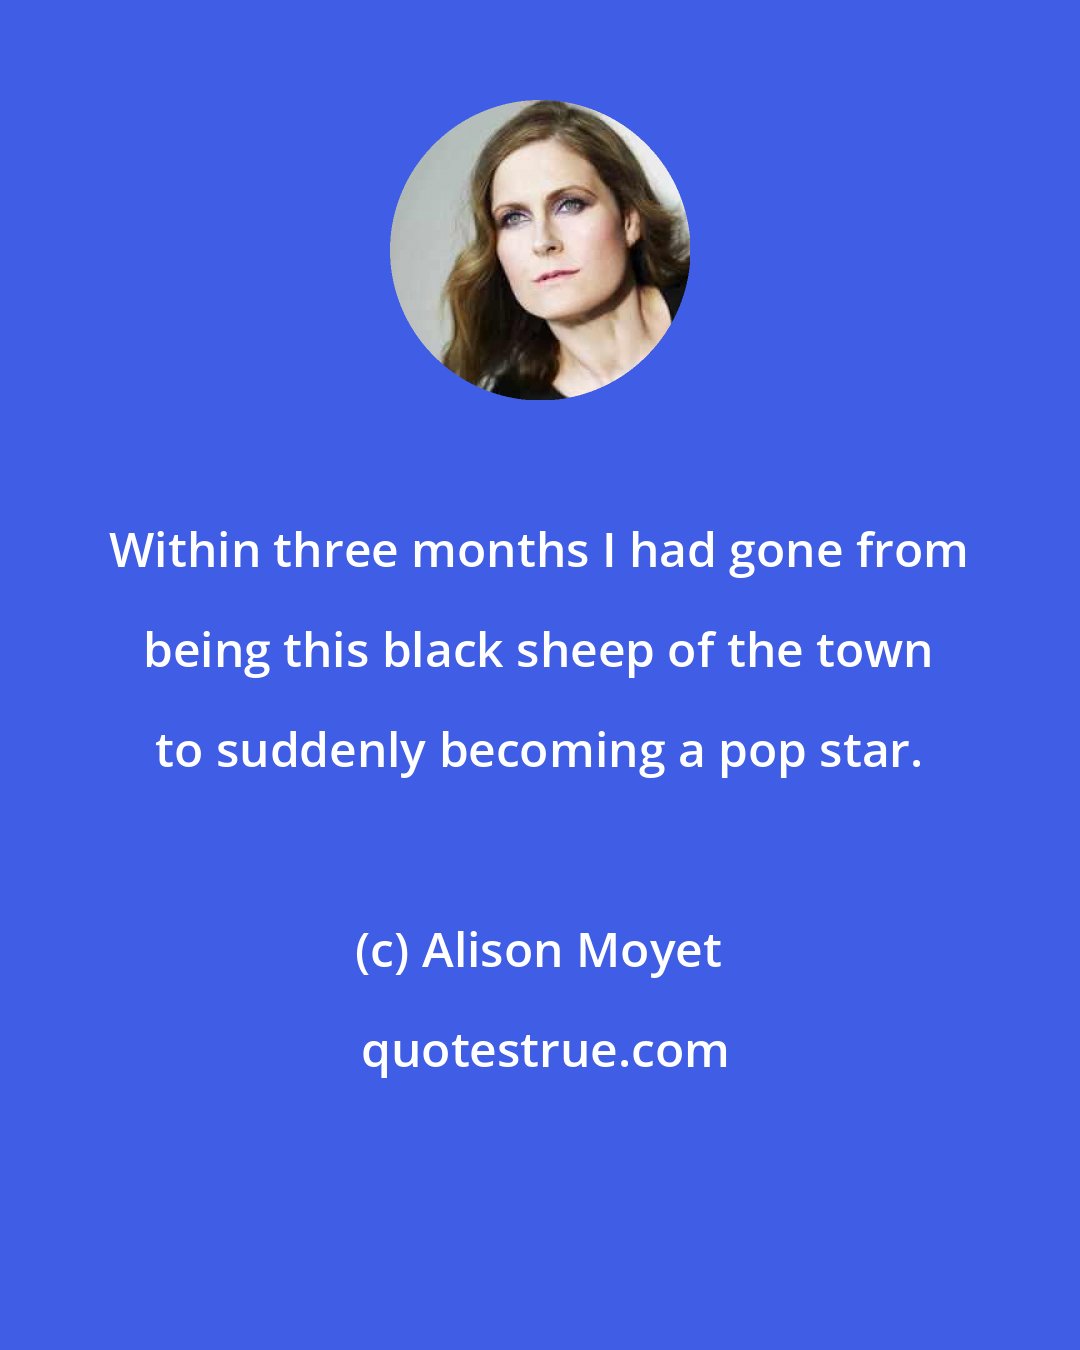 Alison Moyet: Within three months I had gone from being this black sheep of the town to suddenly becoming a pop star.